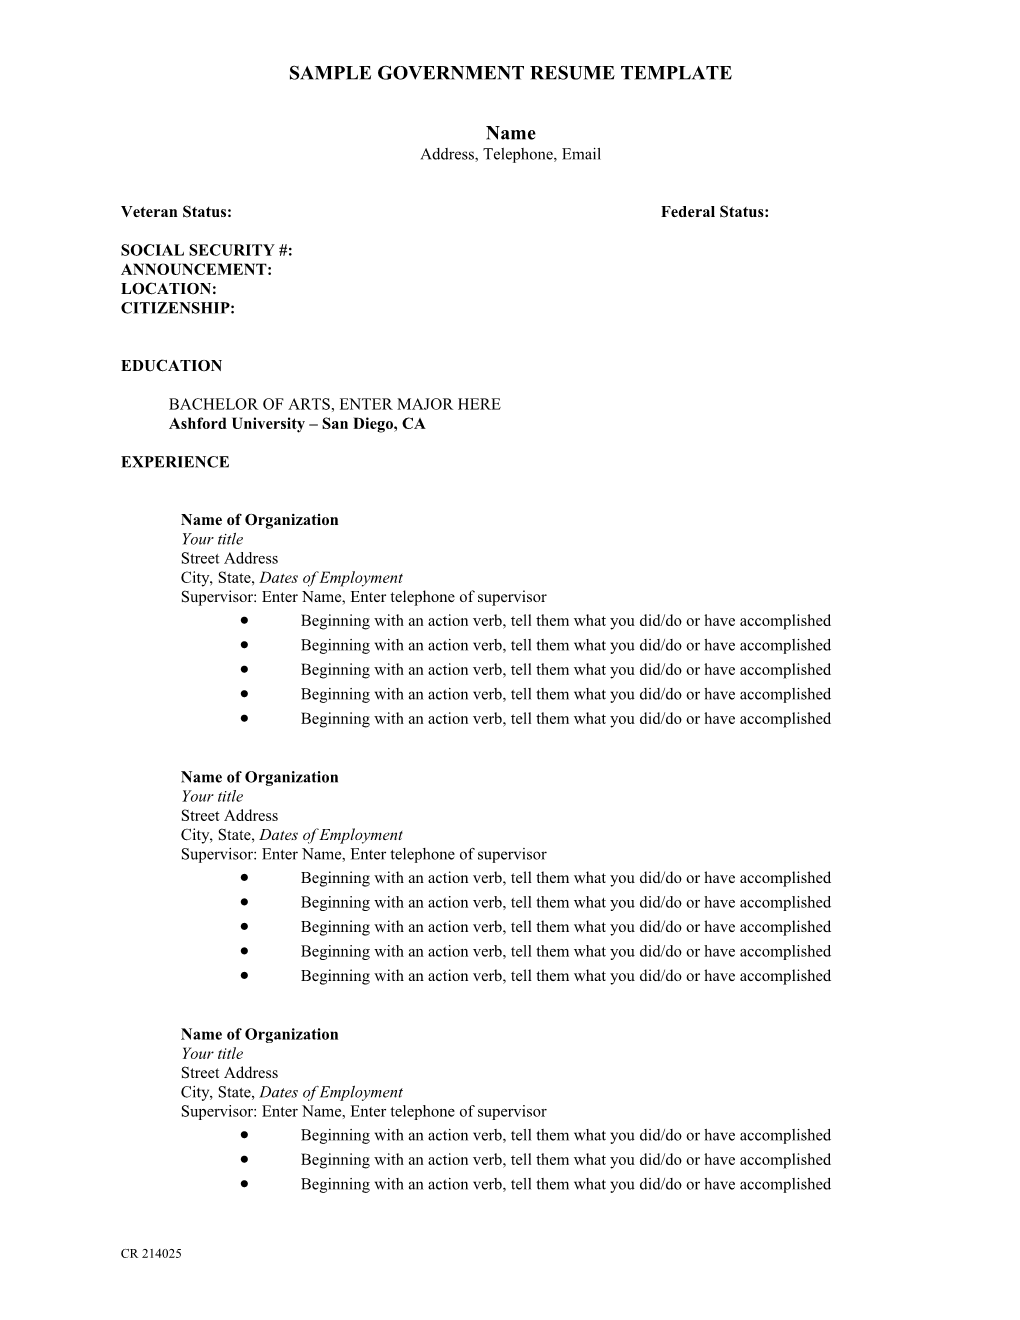 Sample Government Resume Template